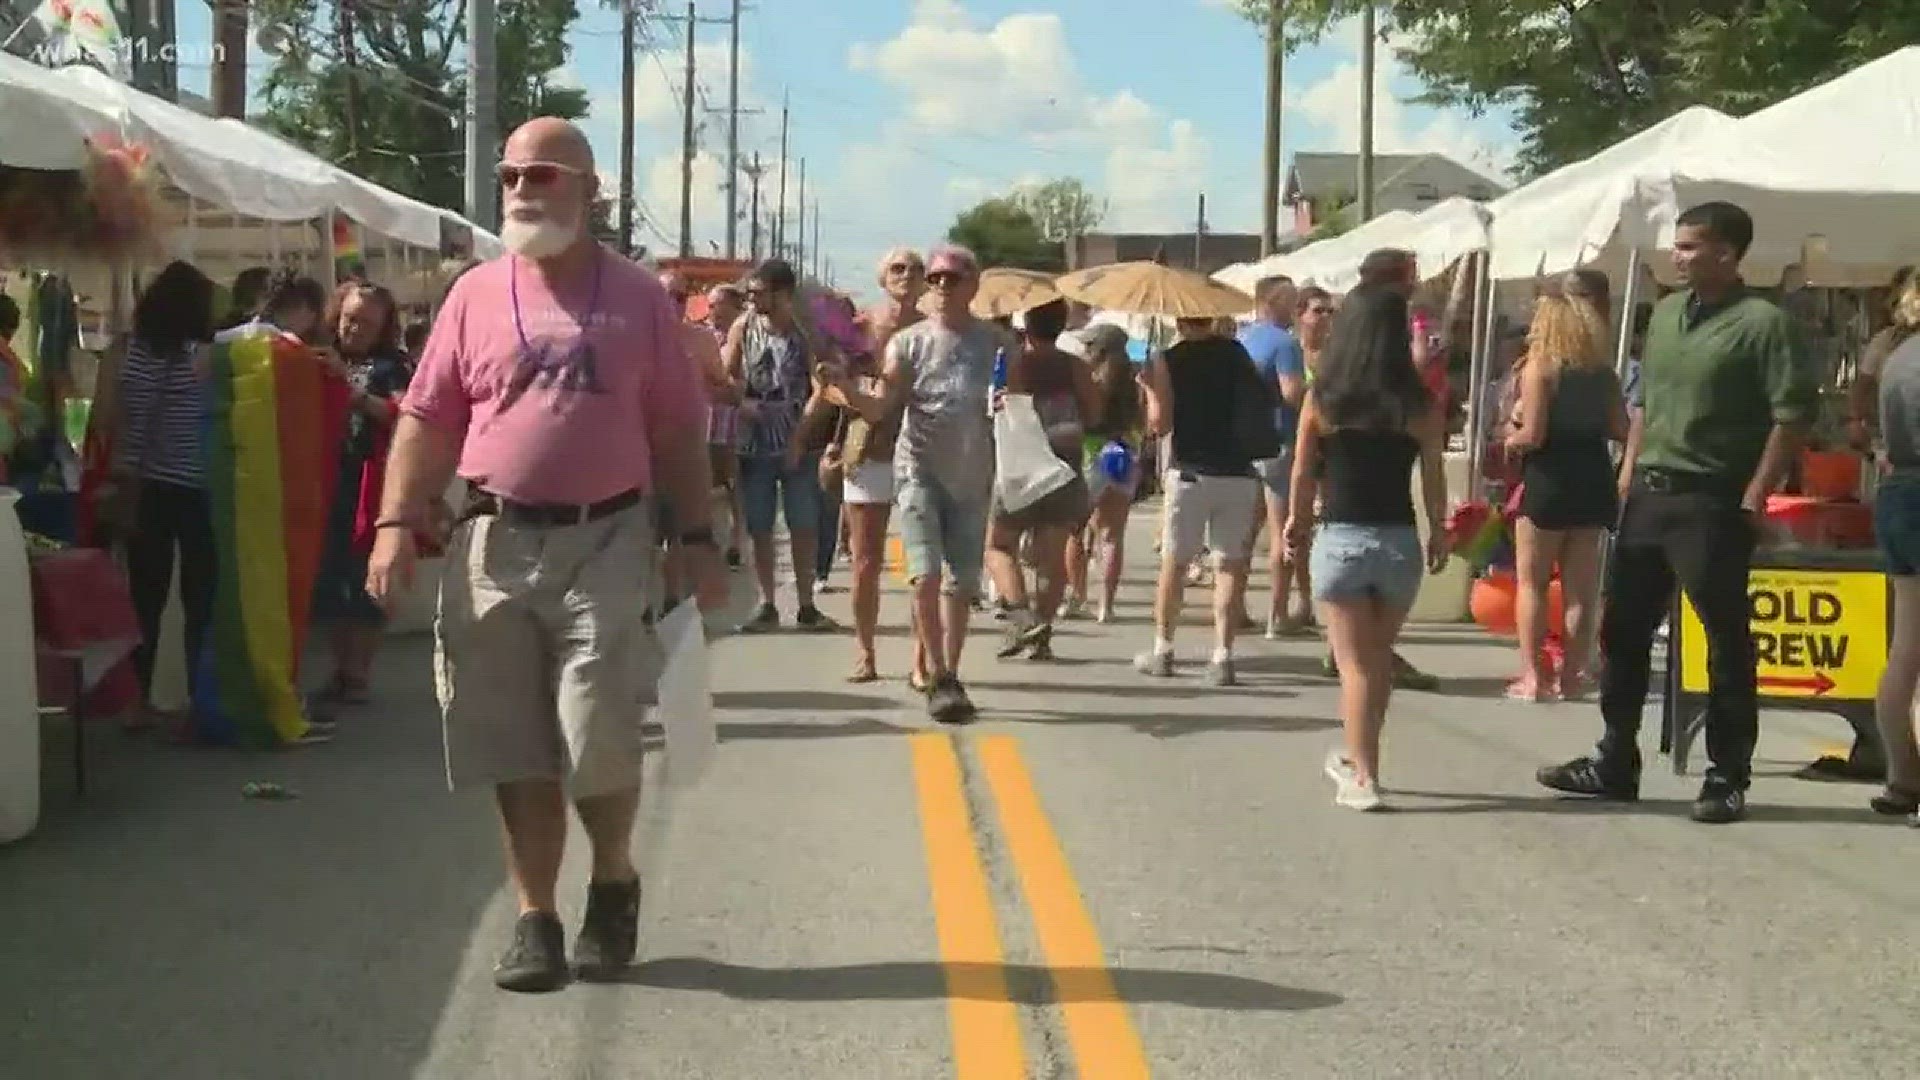 The Louisville Pride Festival is celebrating its fourth year in the Highlands.